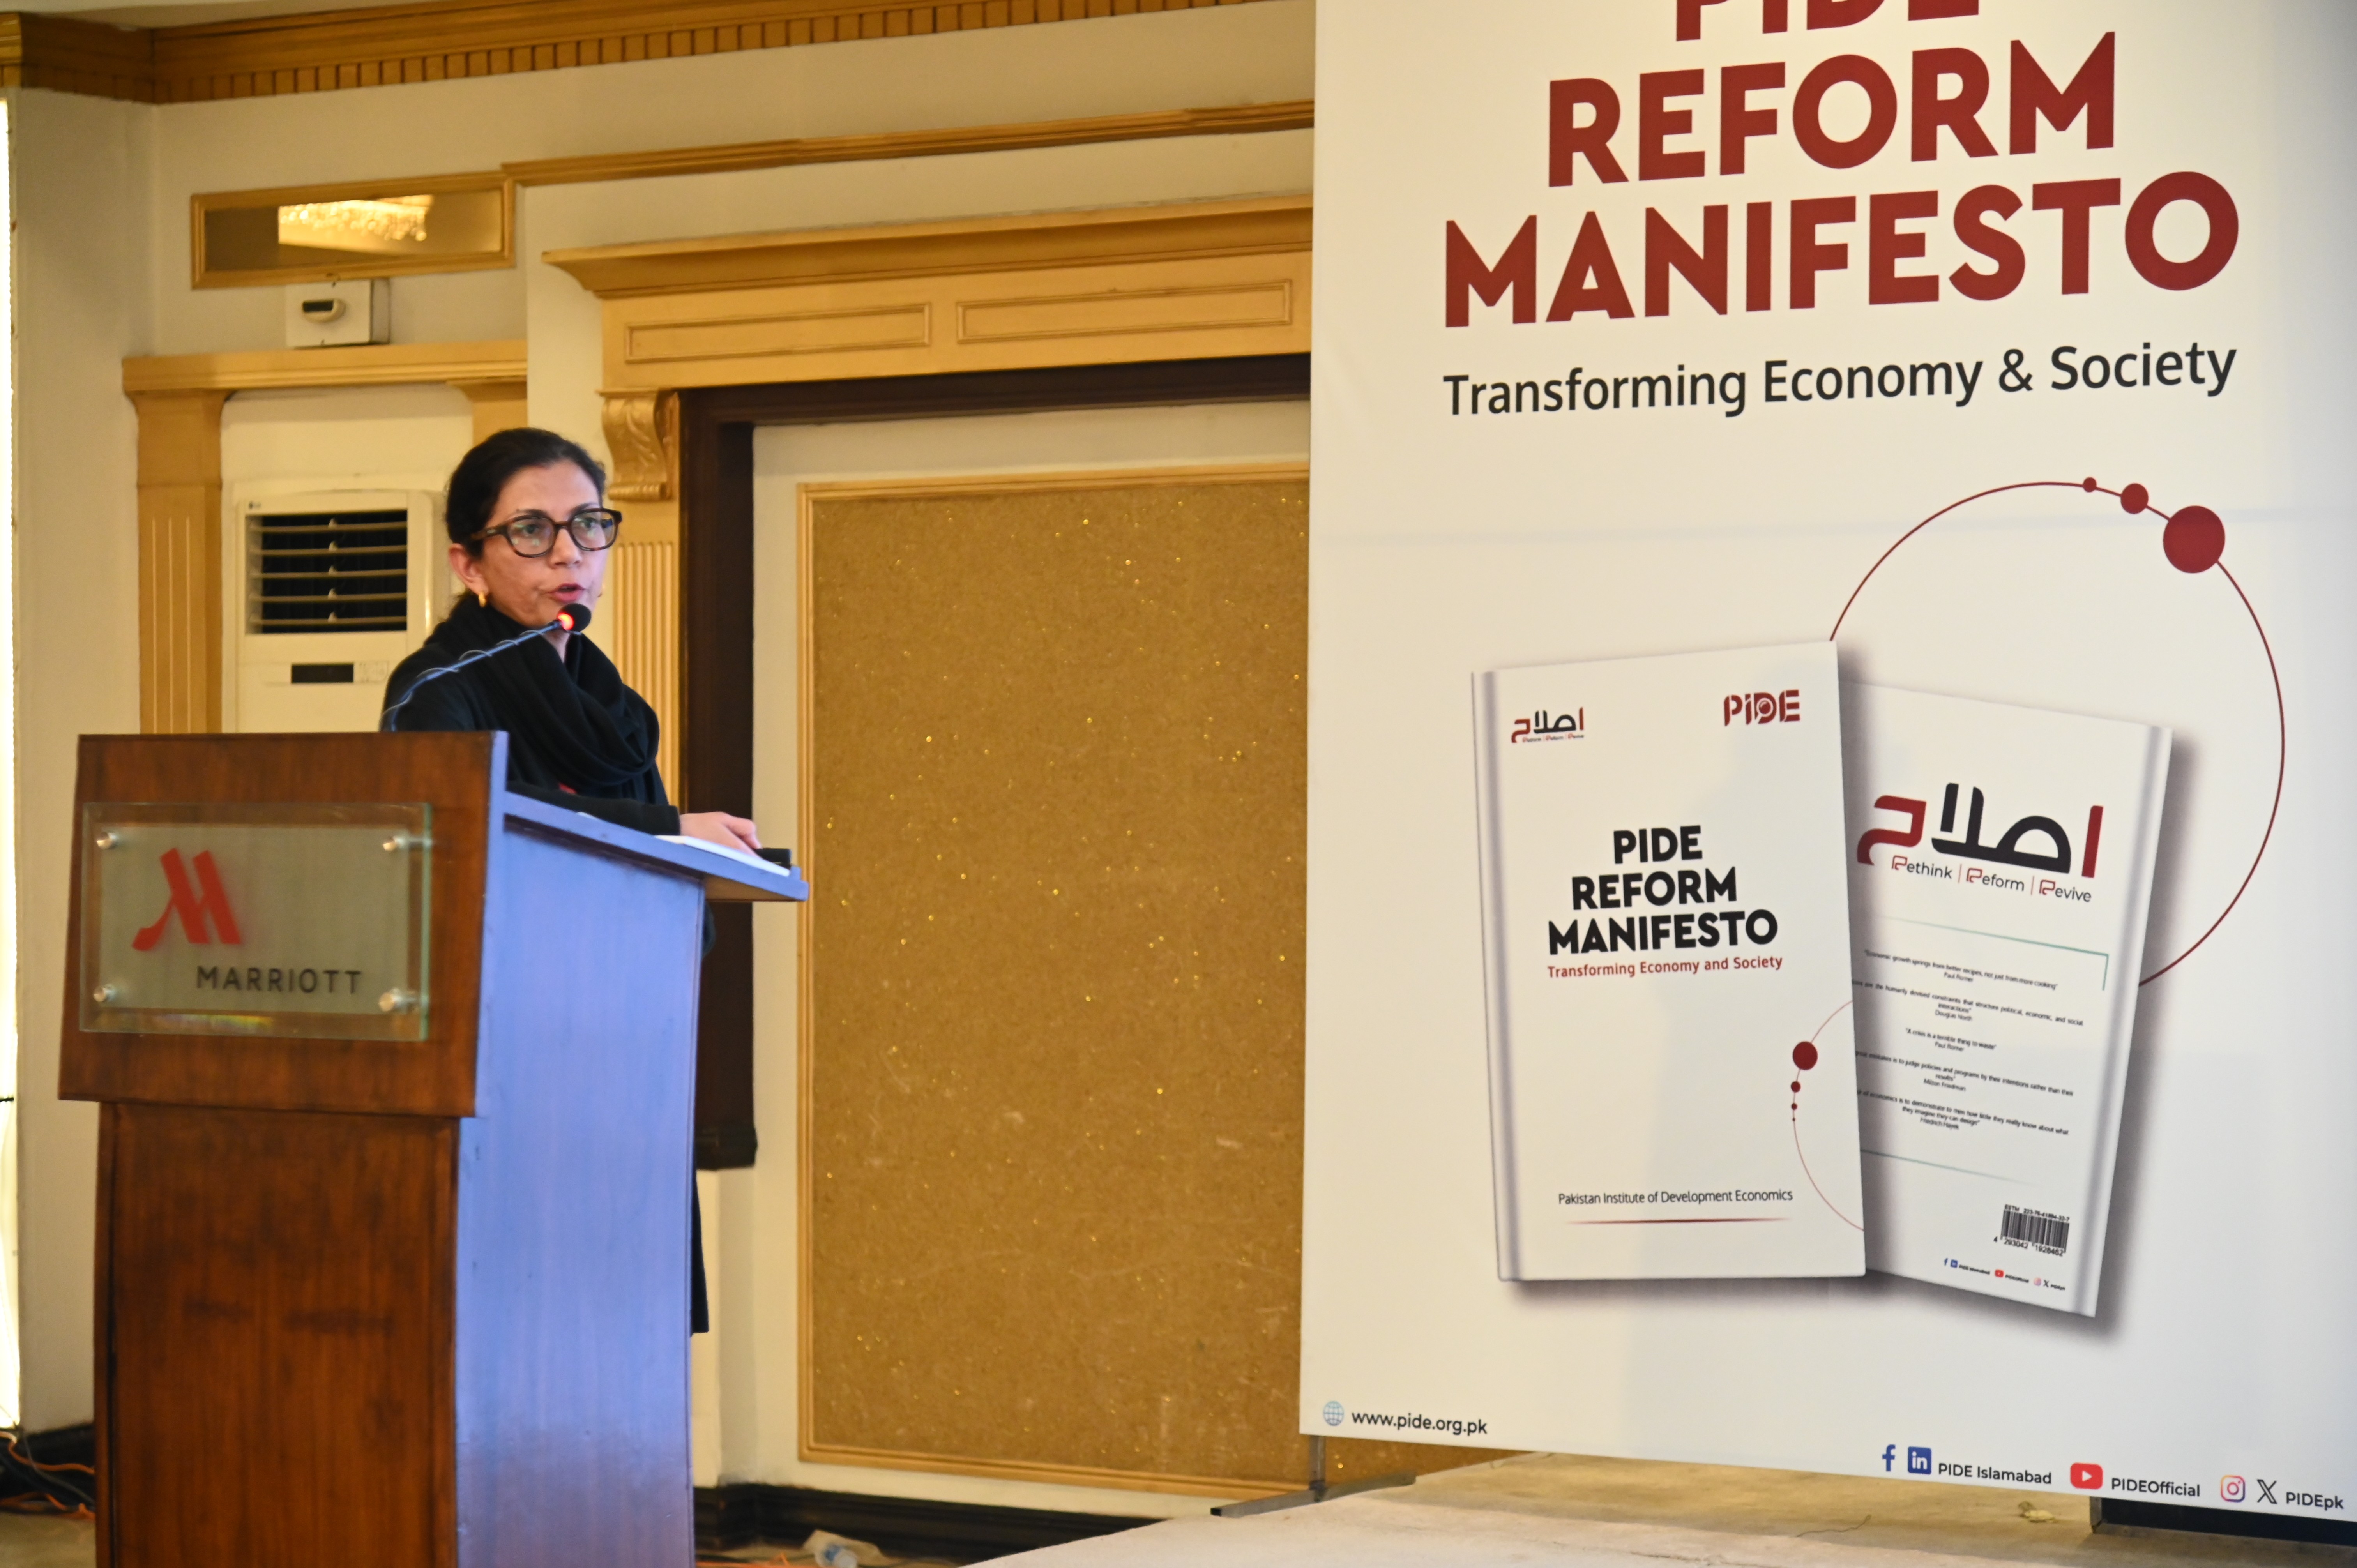 An economic researcher expressing her view on PIDE reform manifesto in transforming the economy and society